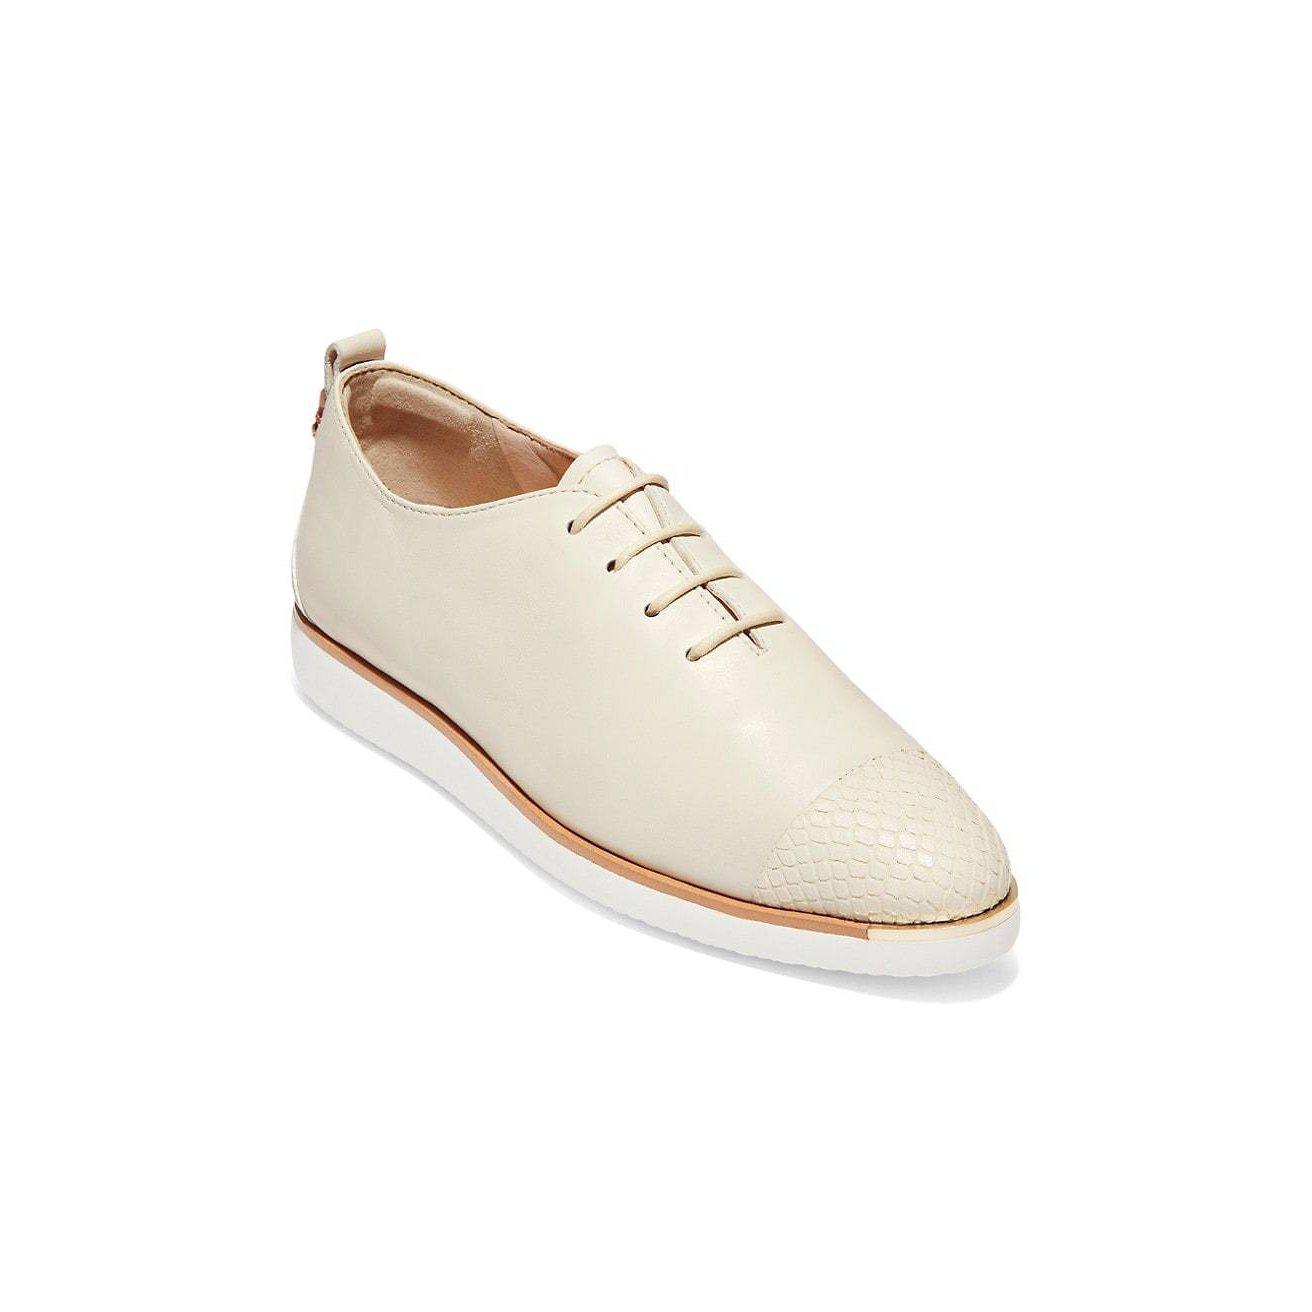 Grand Ambition Lace Up Oxford